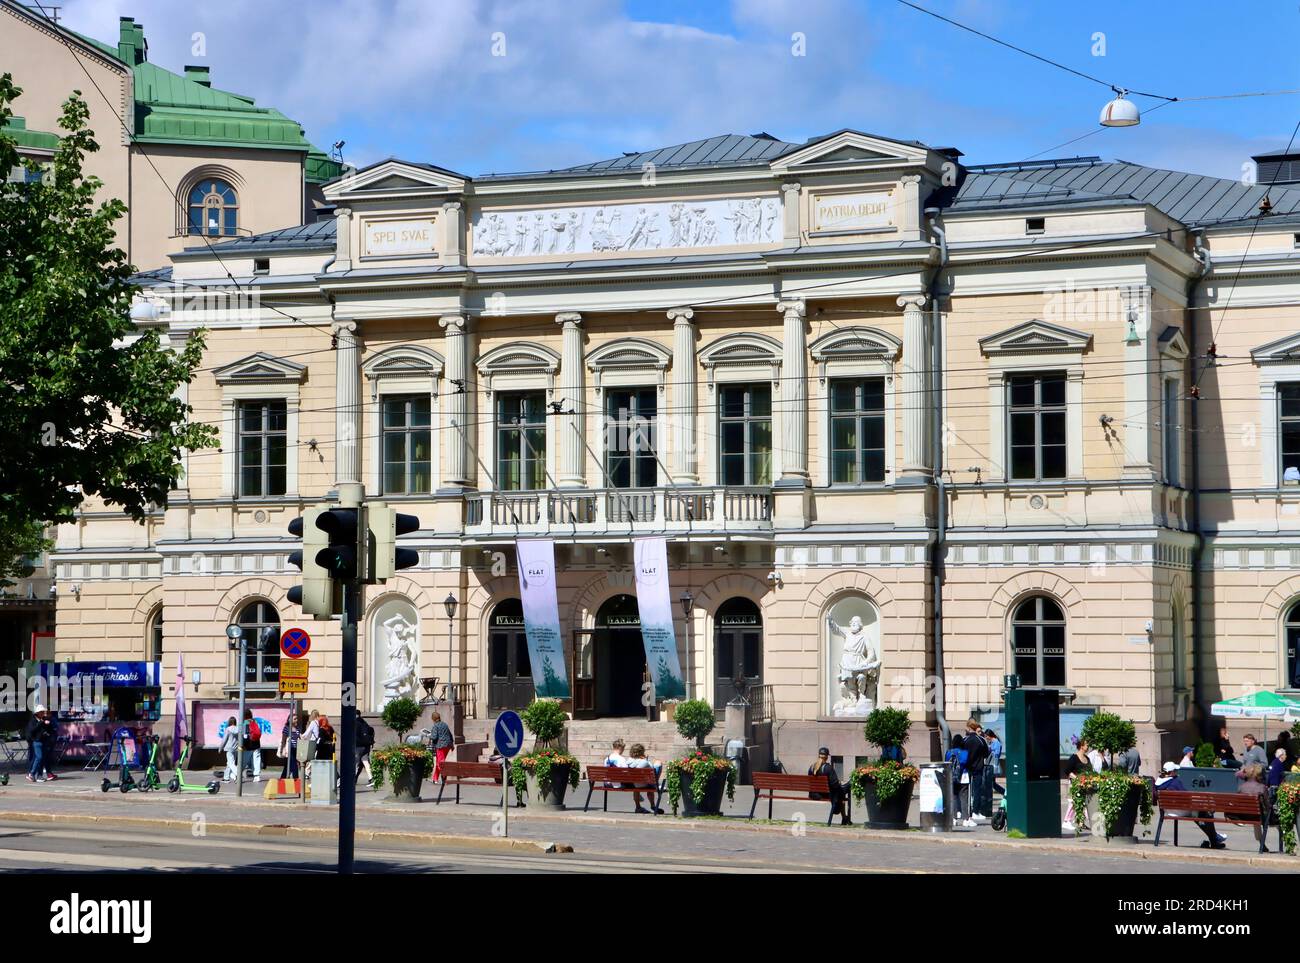 The Old Student House, Vanha Ylioppilastalo, event space on Mannerheimintie across from Stockmann department store in Helsinki, Finland Stock Photo